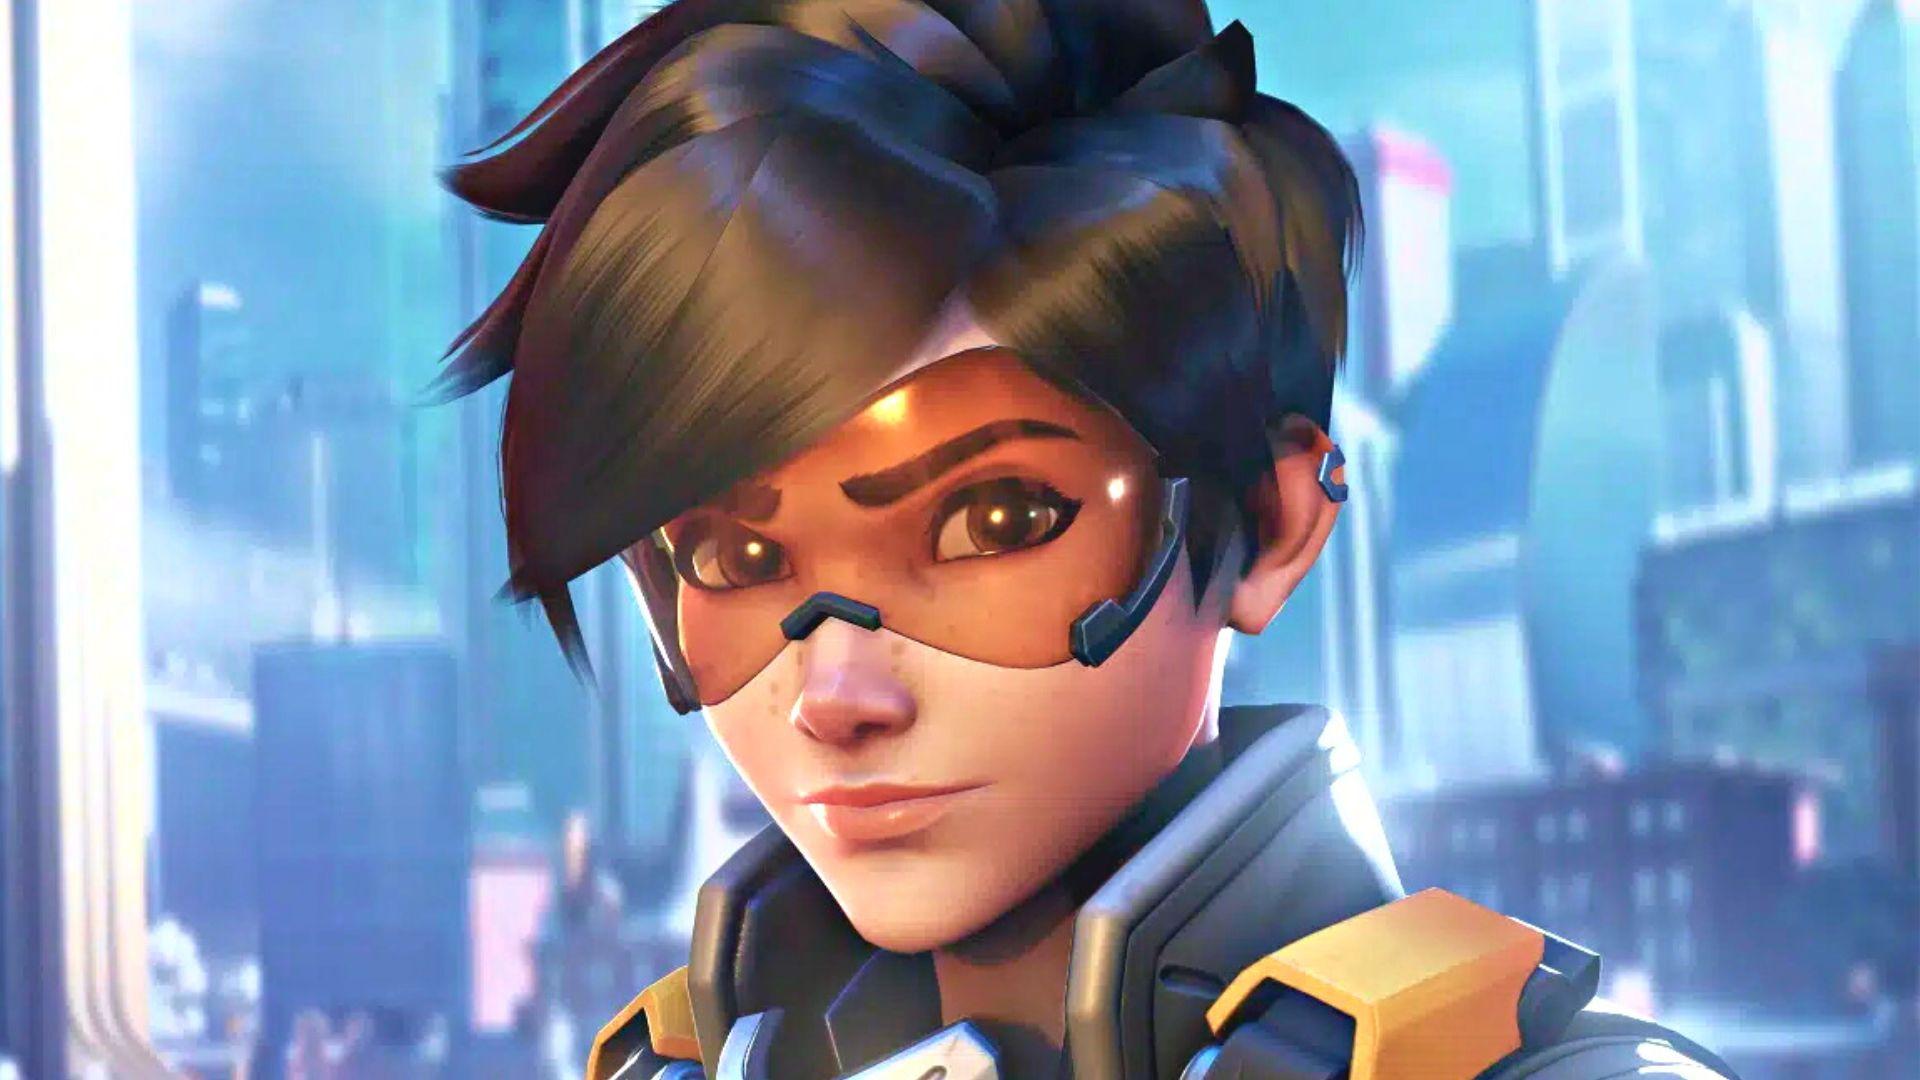 Overwatch 2 Tracer Hero Guide » How to Become a Good Tracer